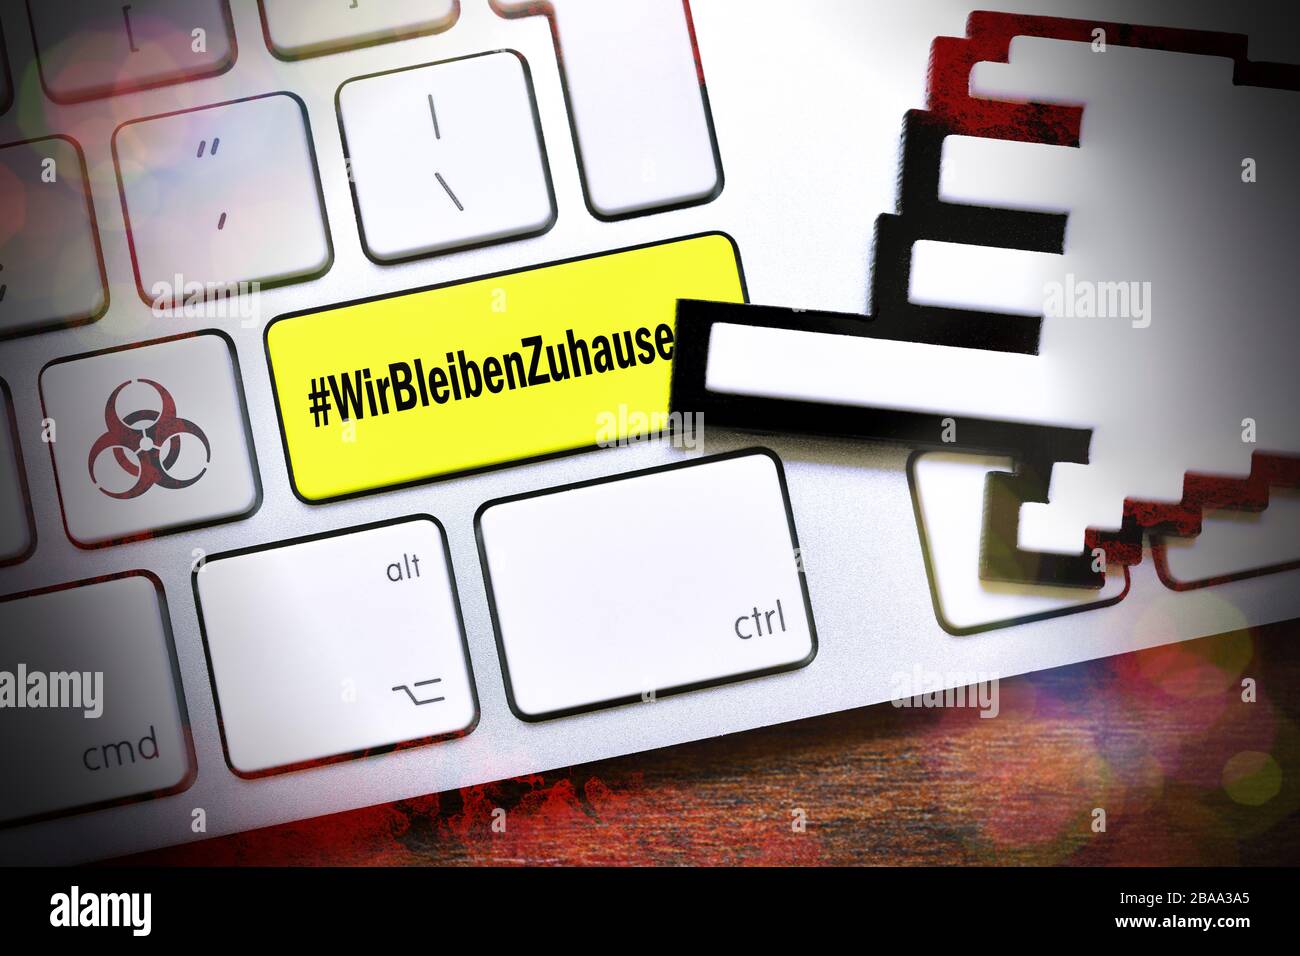 PHOTOMONTAGE, computer key with the Hashtag #WirBleibenZuhause and biology danger sign, FOTOMONTAGE, Computertaste mit dem Hashtag #WirBleibenZuhause Stock Photo